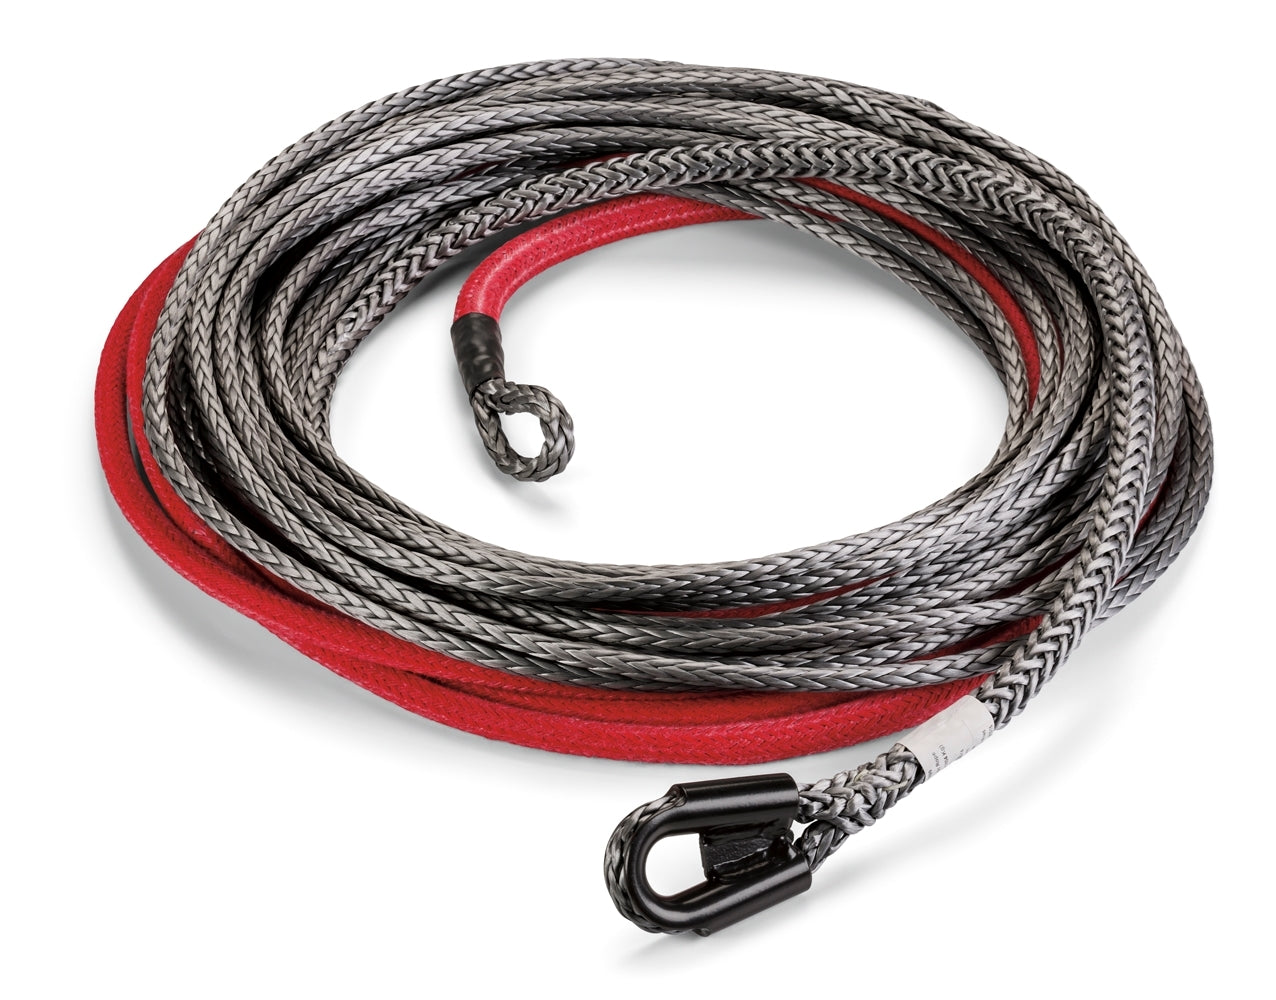 WARN Spydura Pro Winch Cable, 100ft x 7/16in